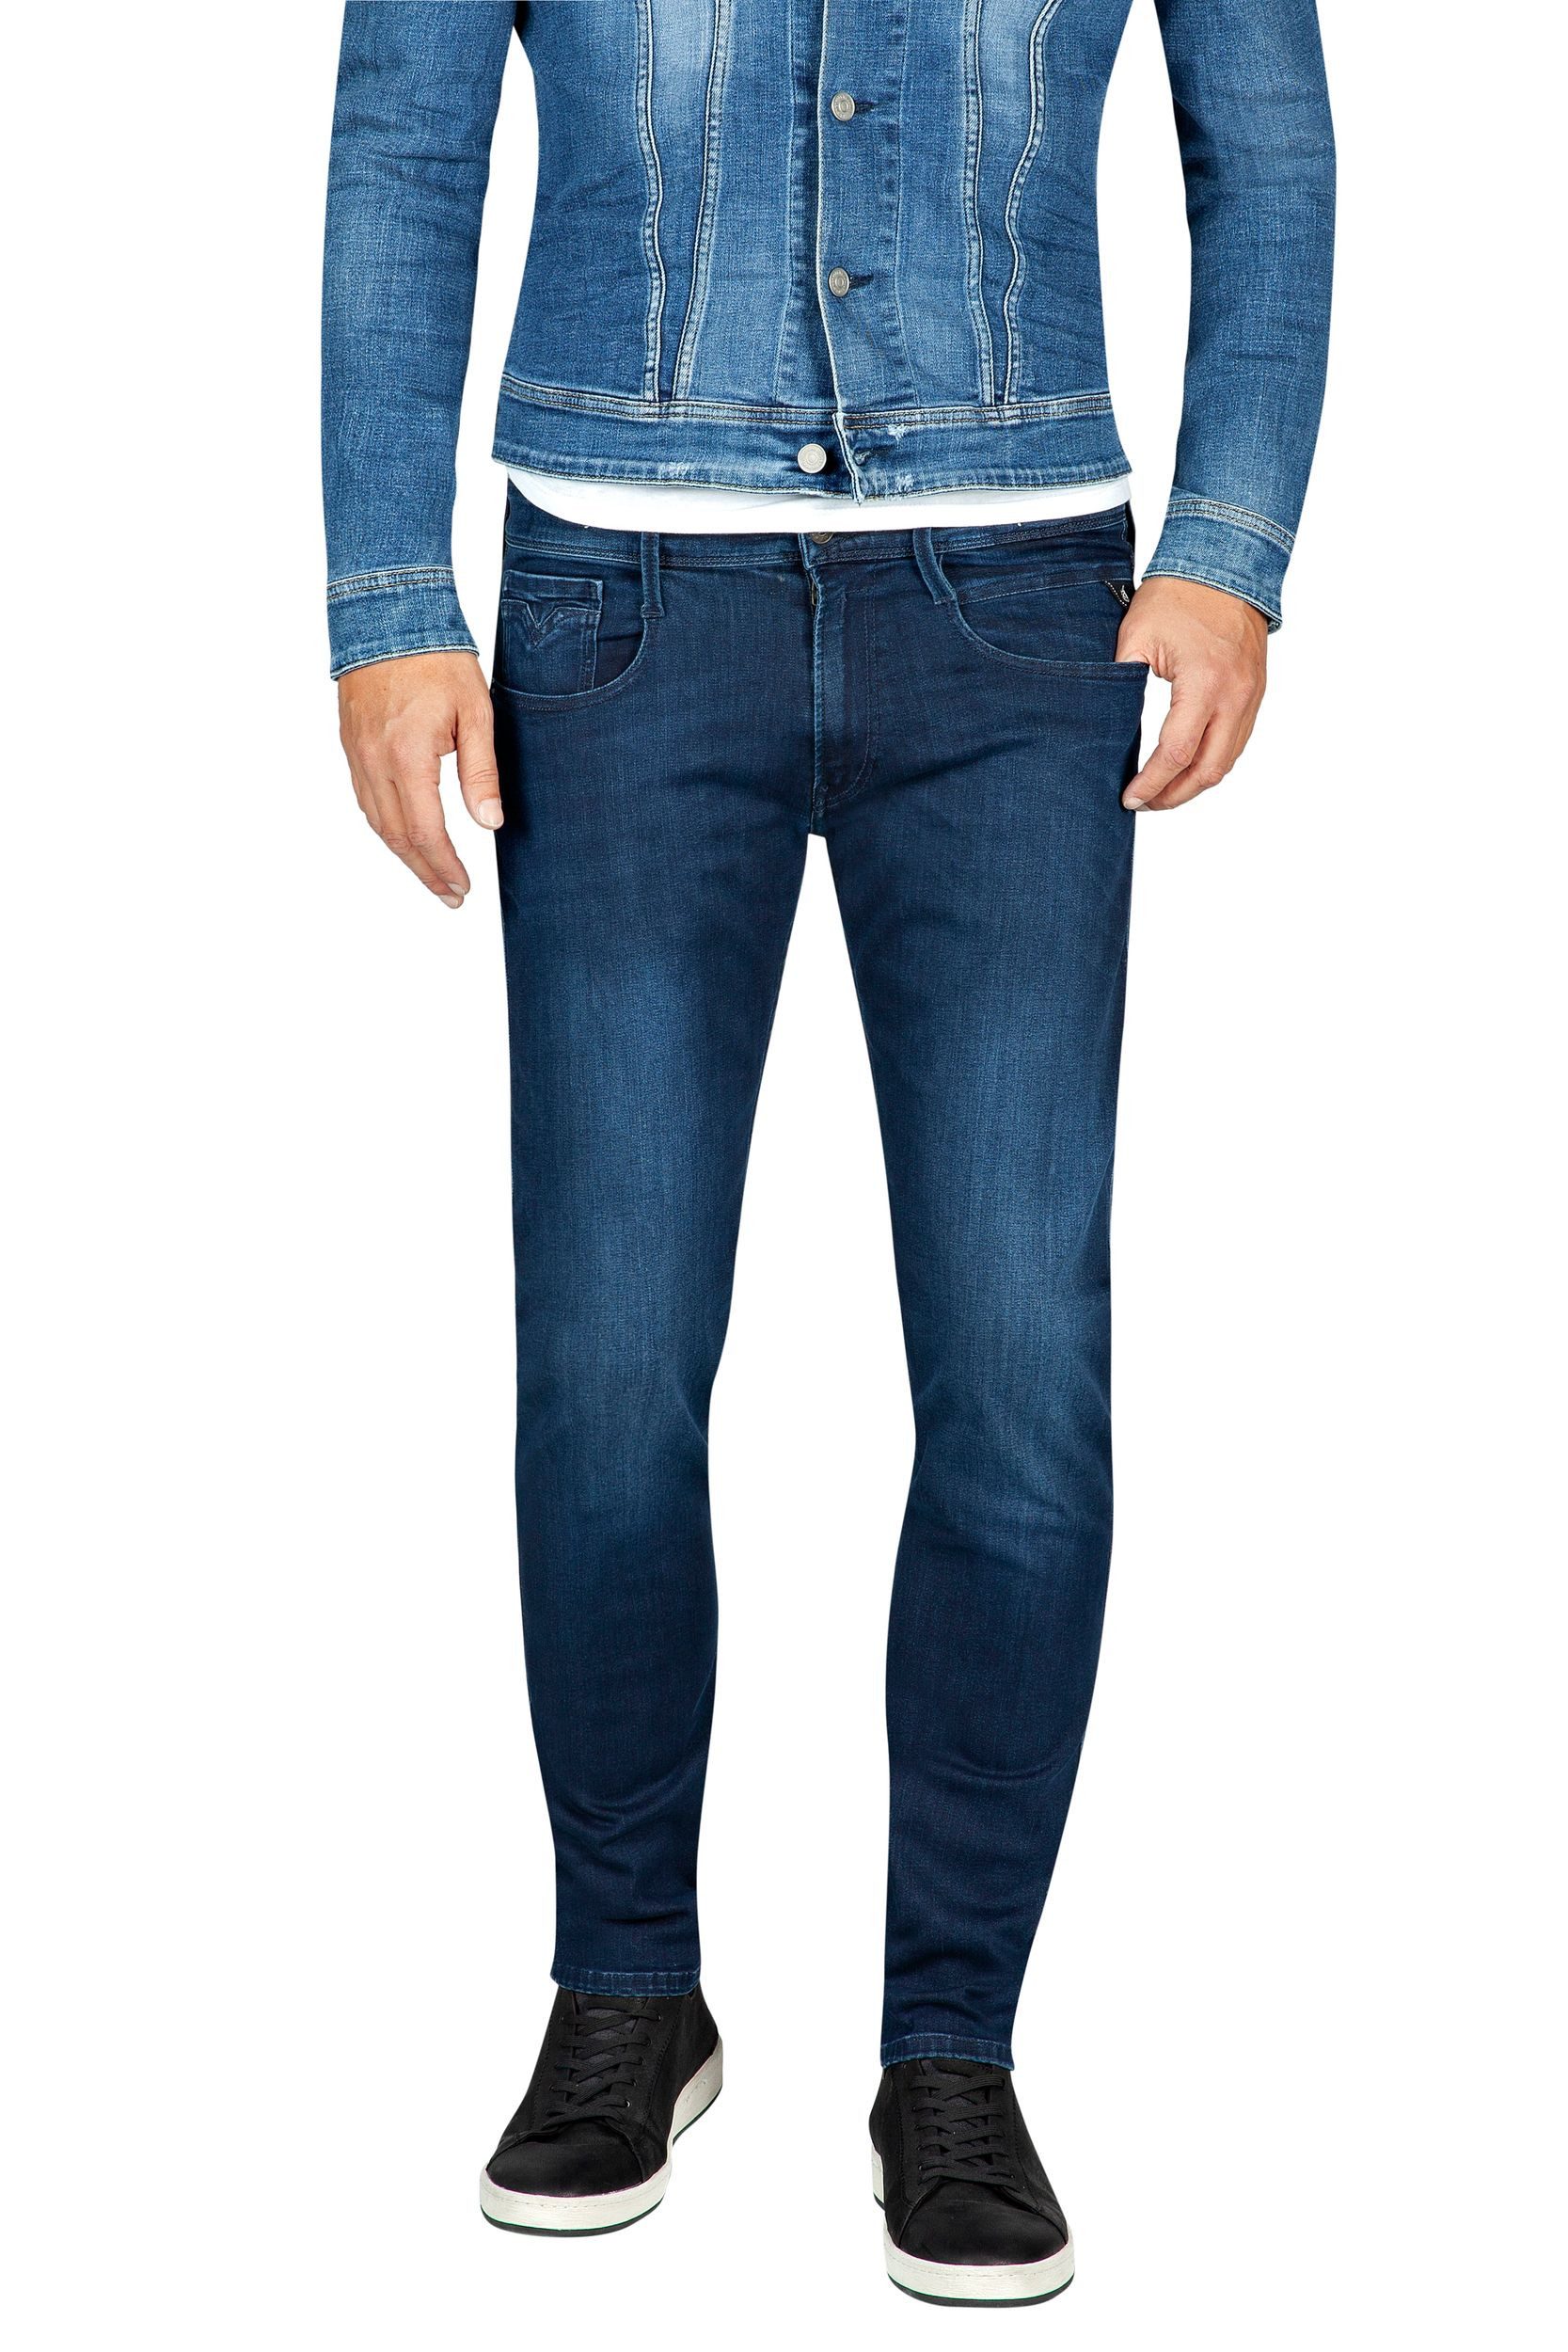 Replay Dad-Jeans M914.000.41A C38